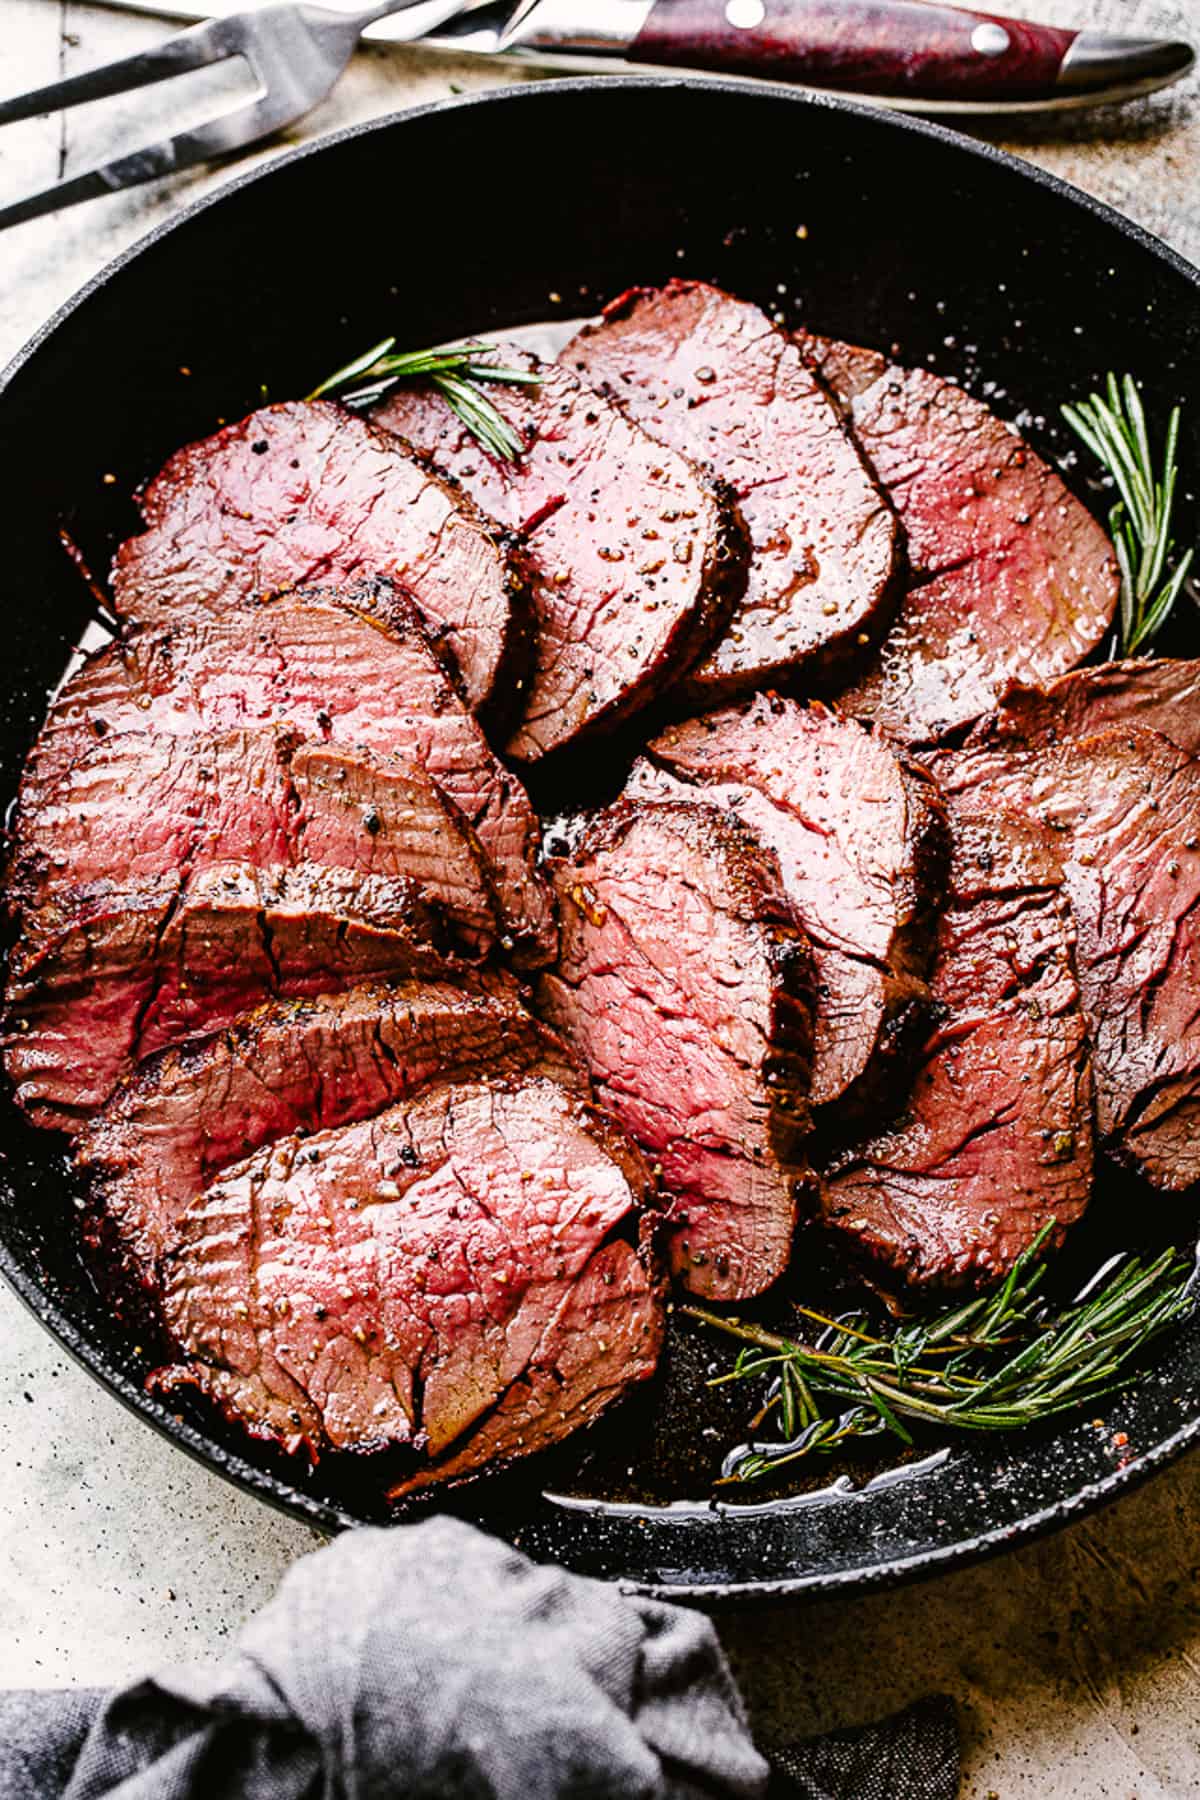 Cooked and sliced beef in a skillet.